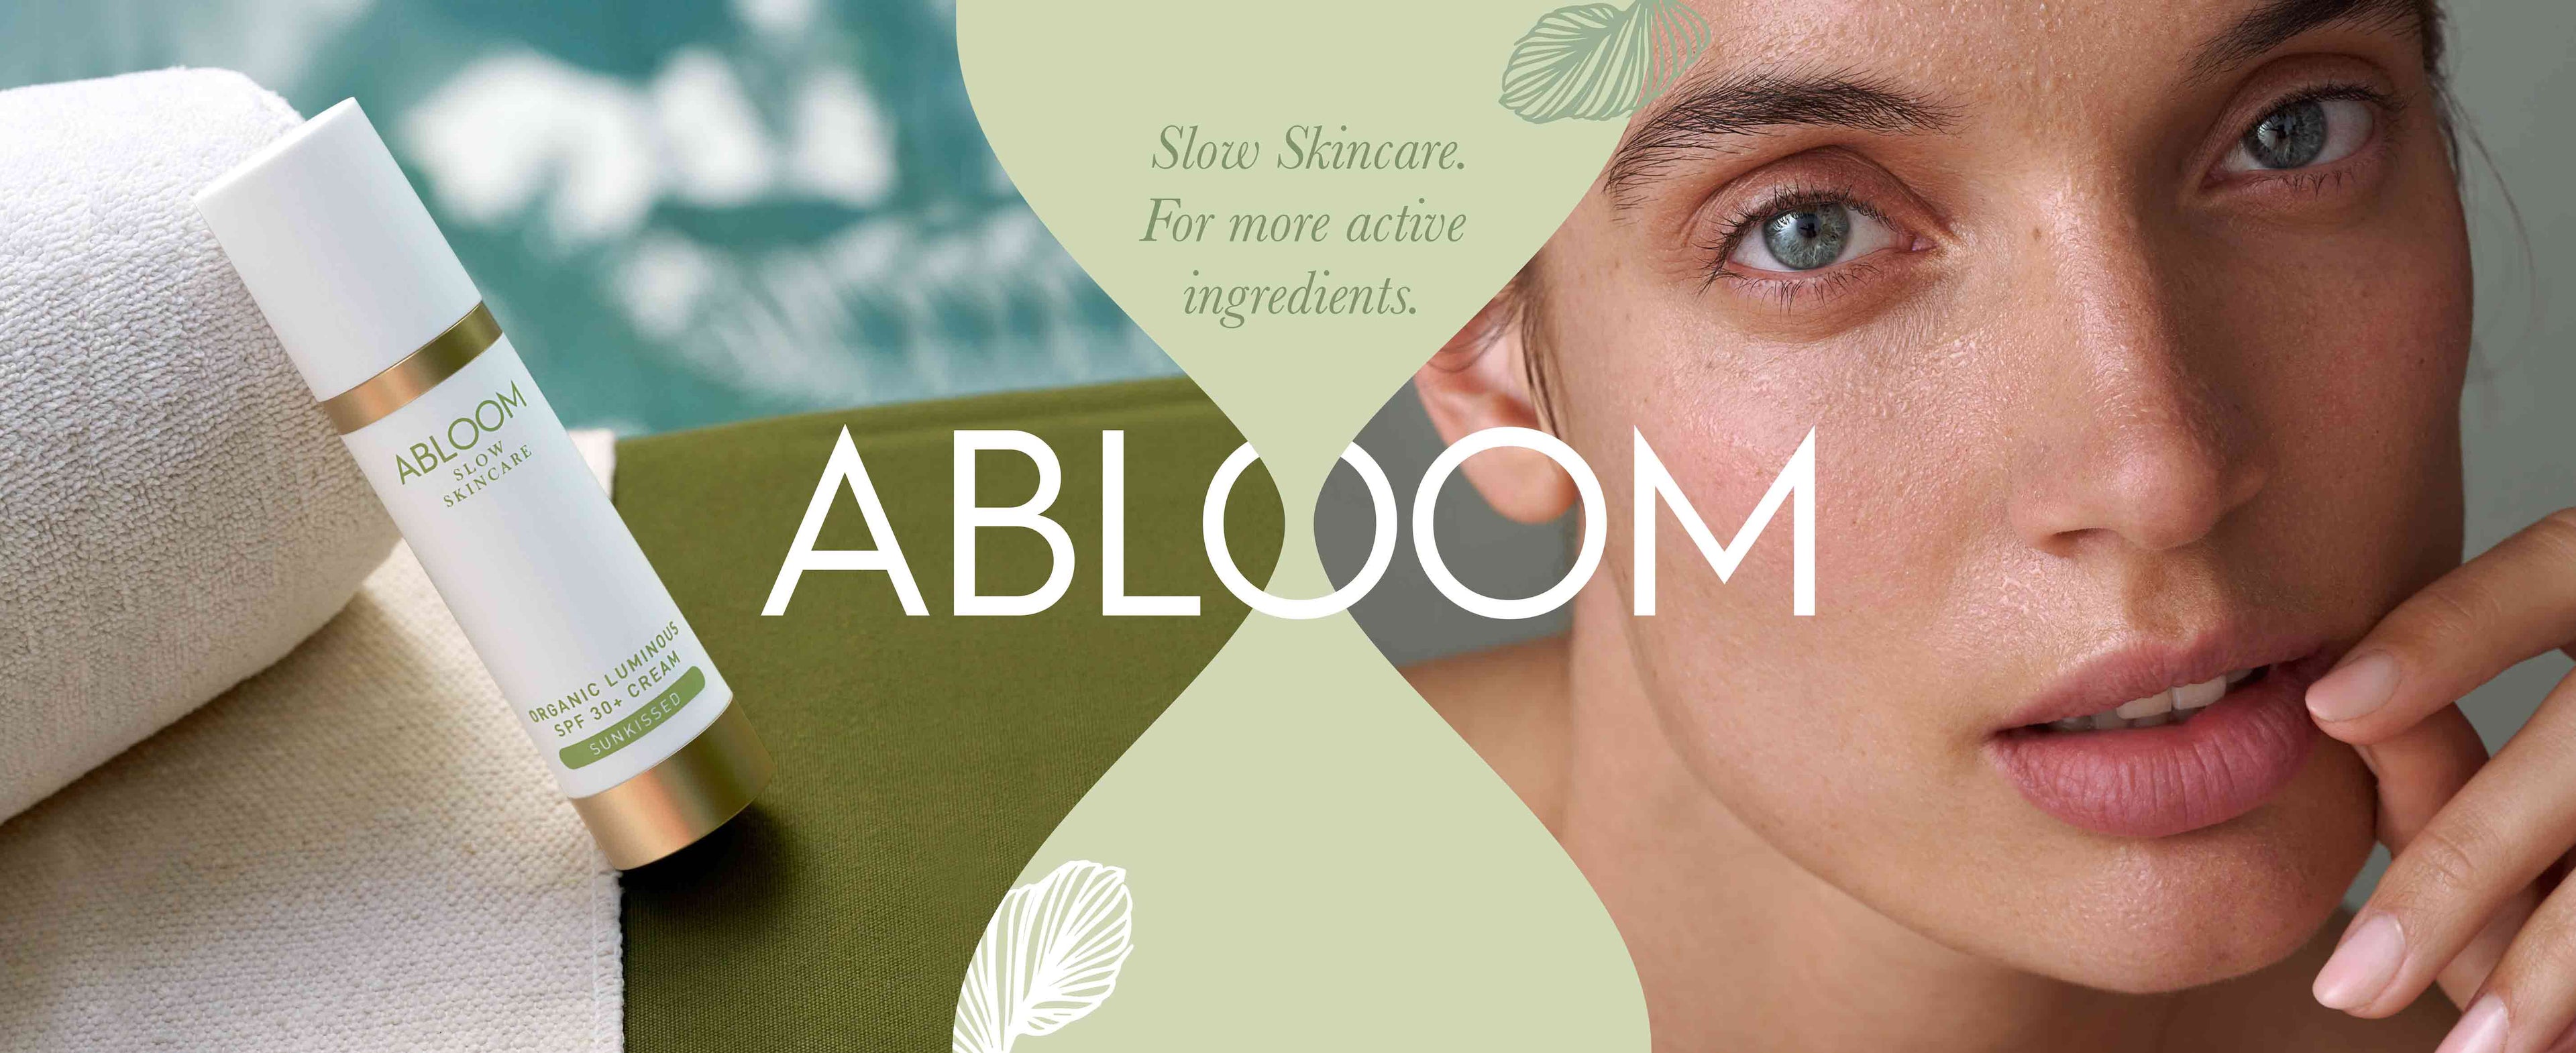 Abloom Slow Skincare Our Story